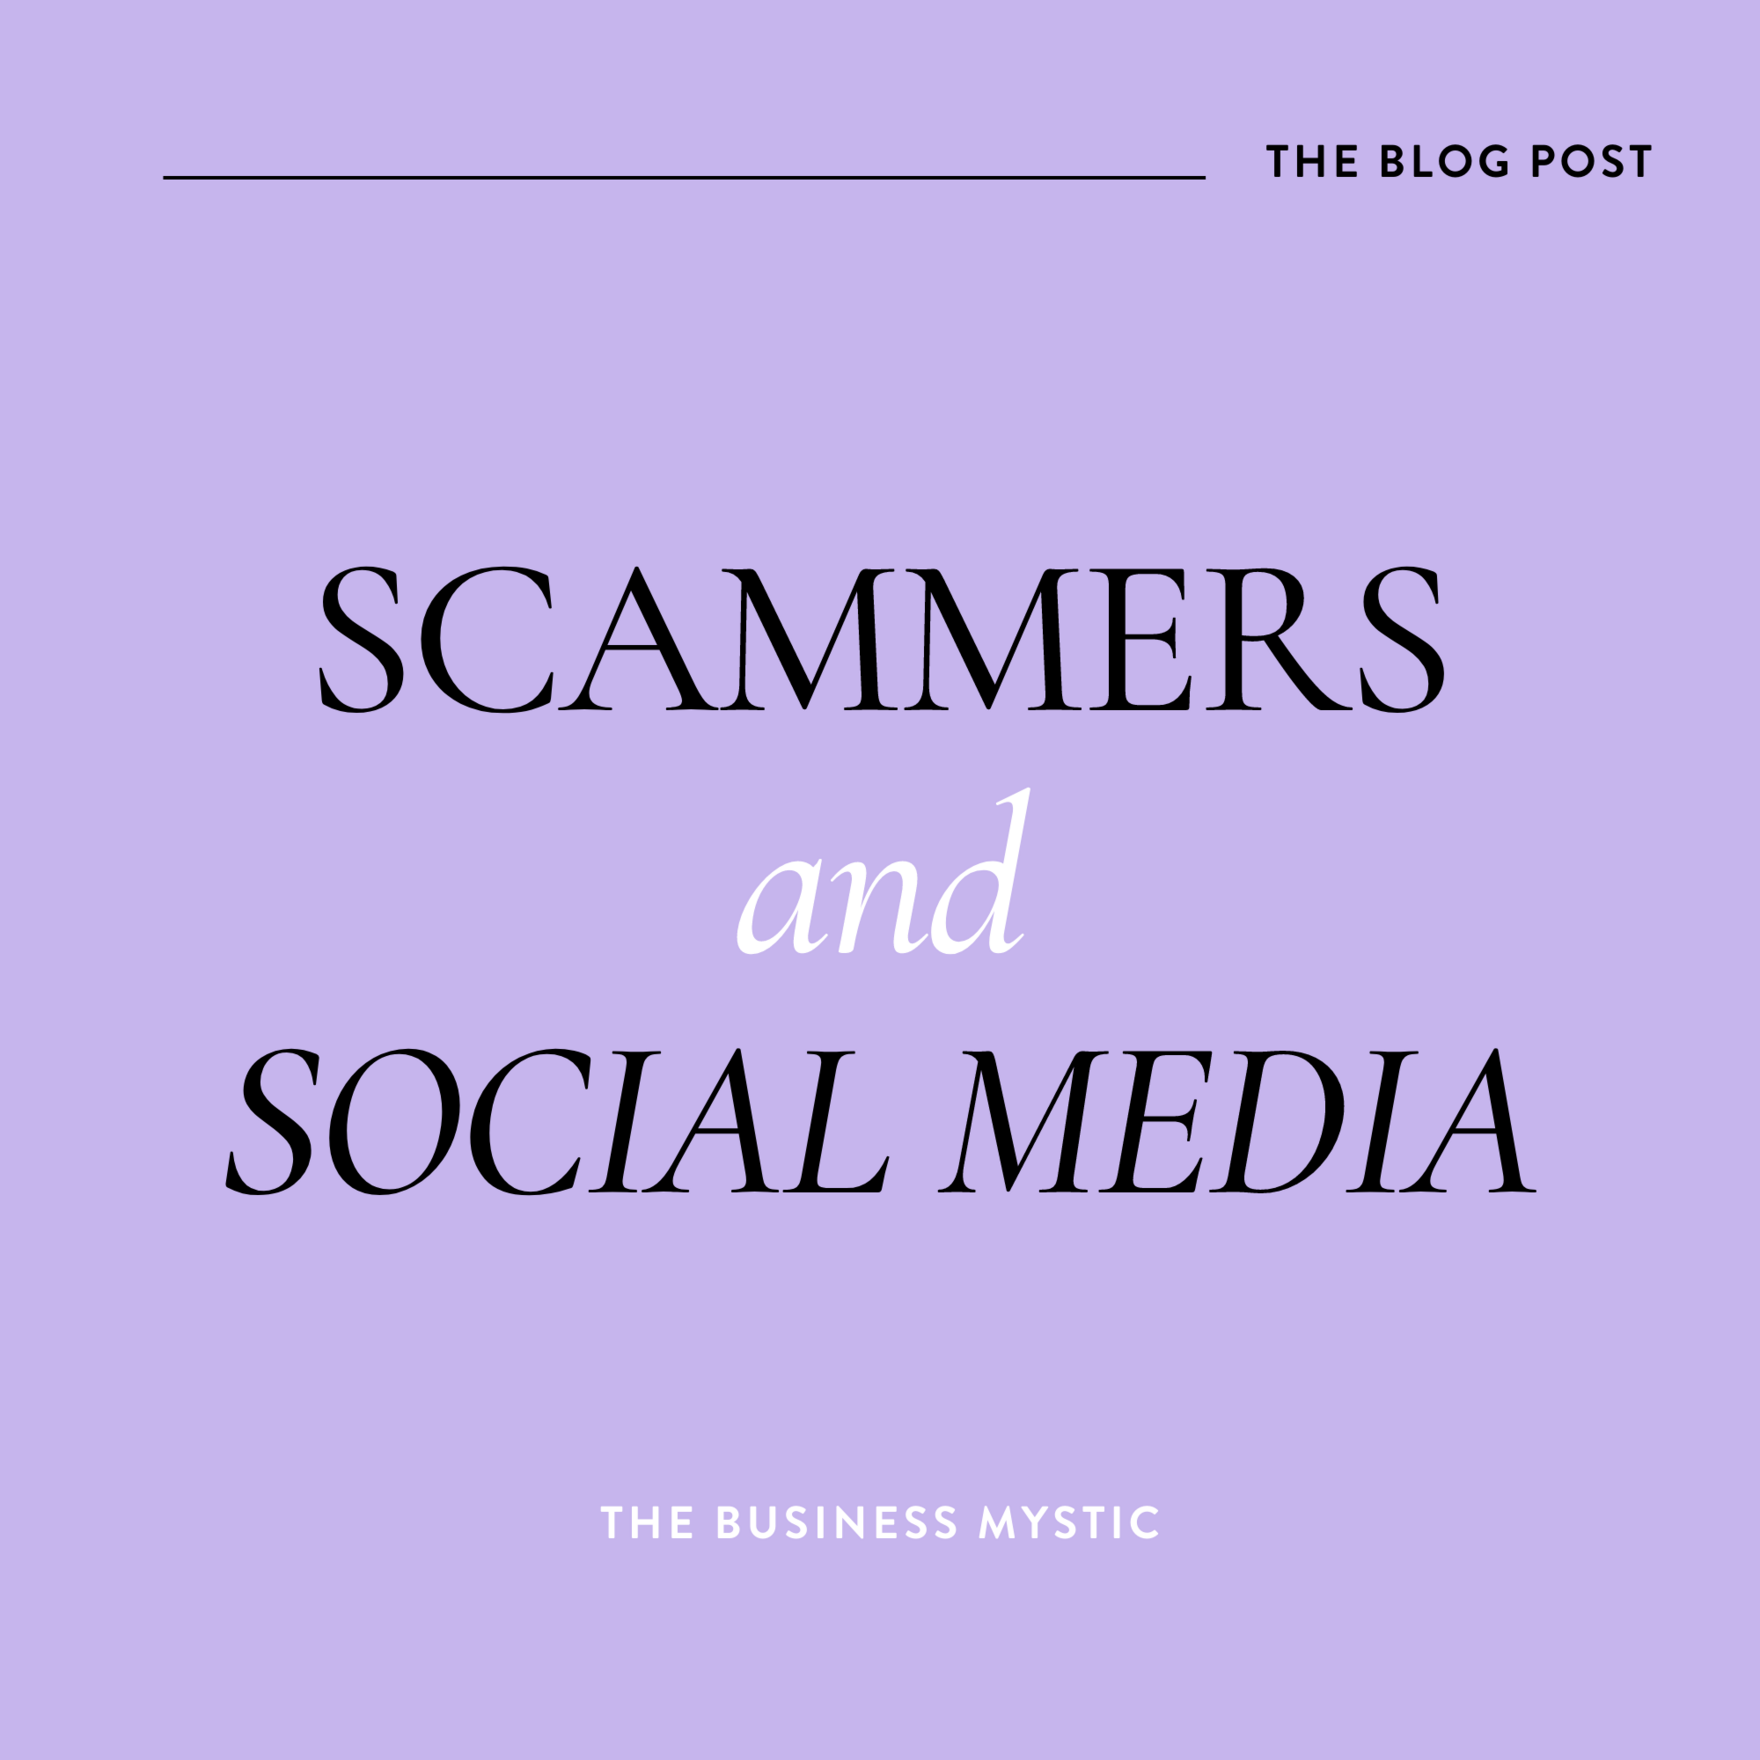 SCAMMERS AND SOCIAL MEDIA